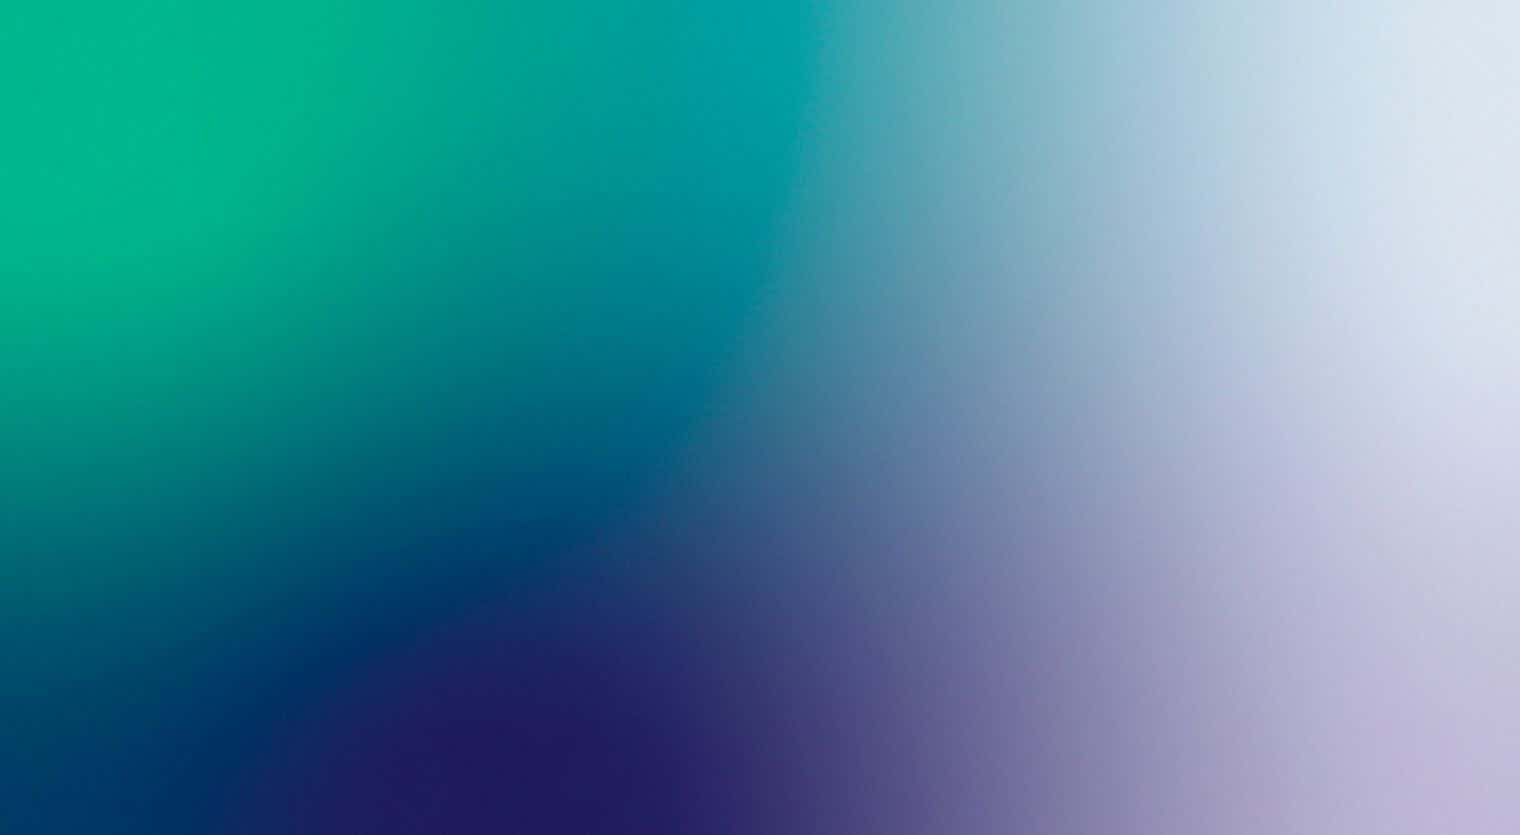 Colors in a gradient